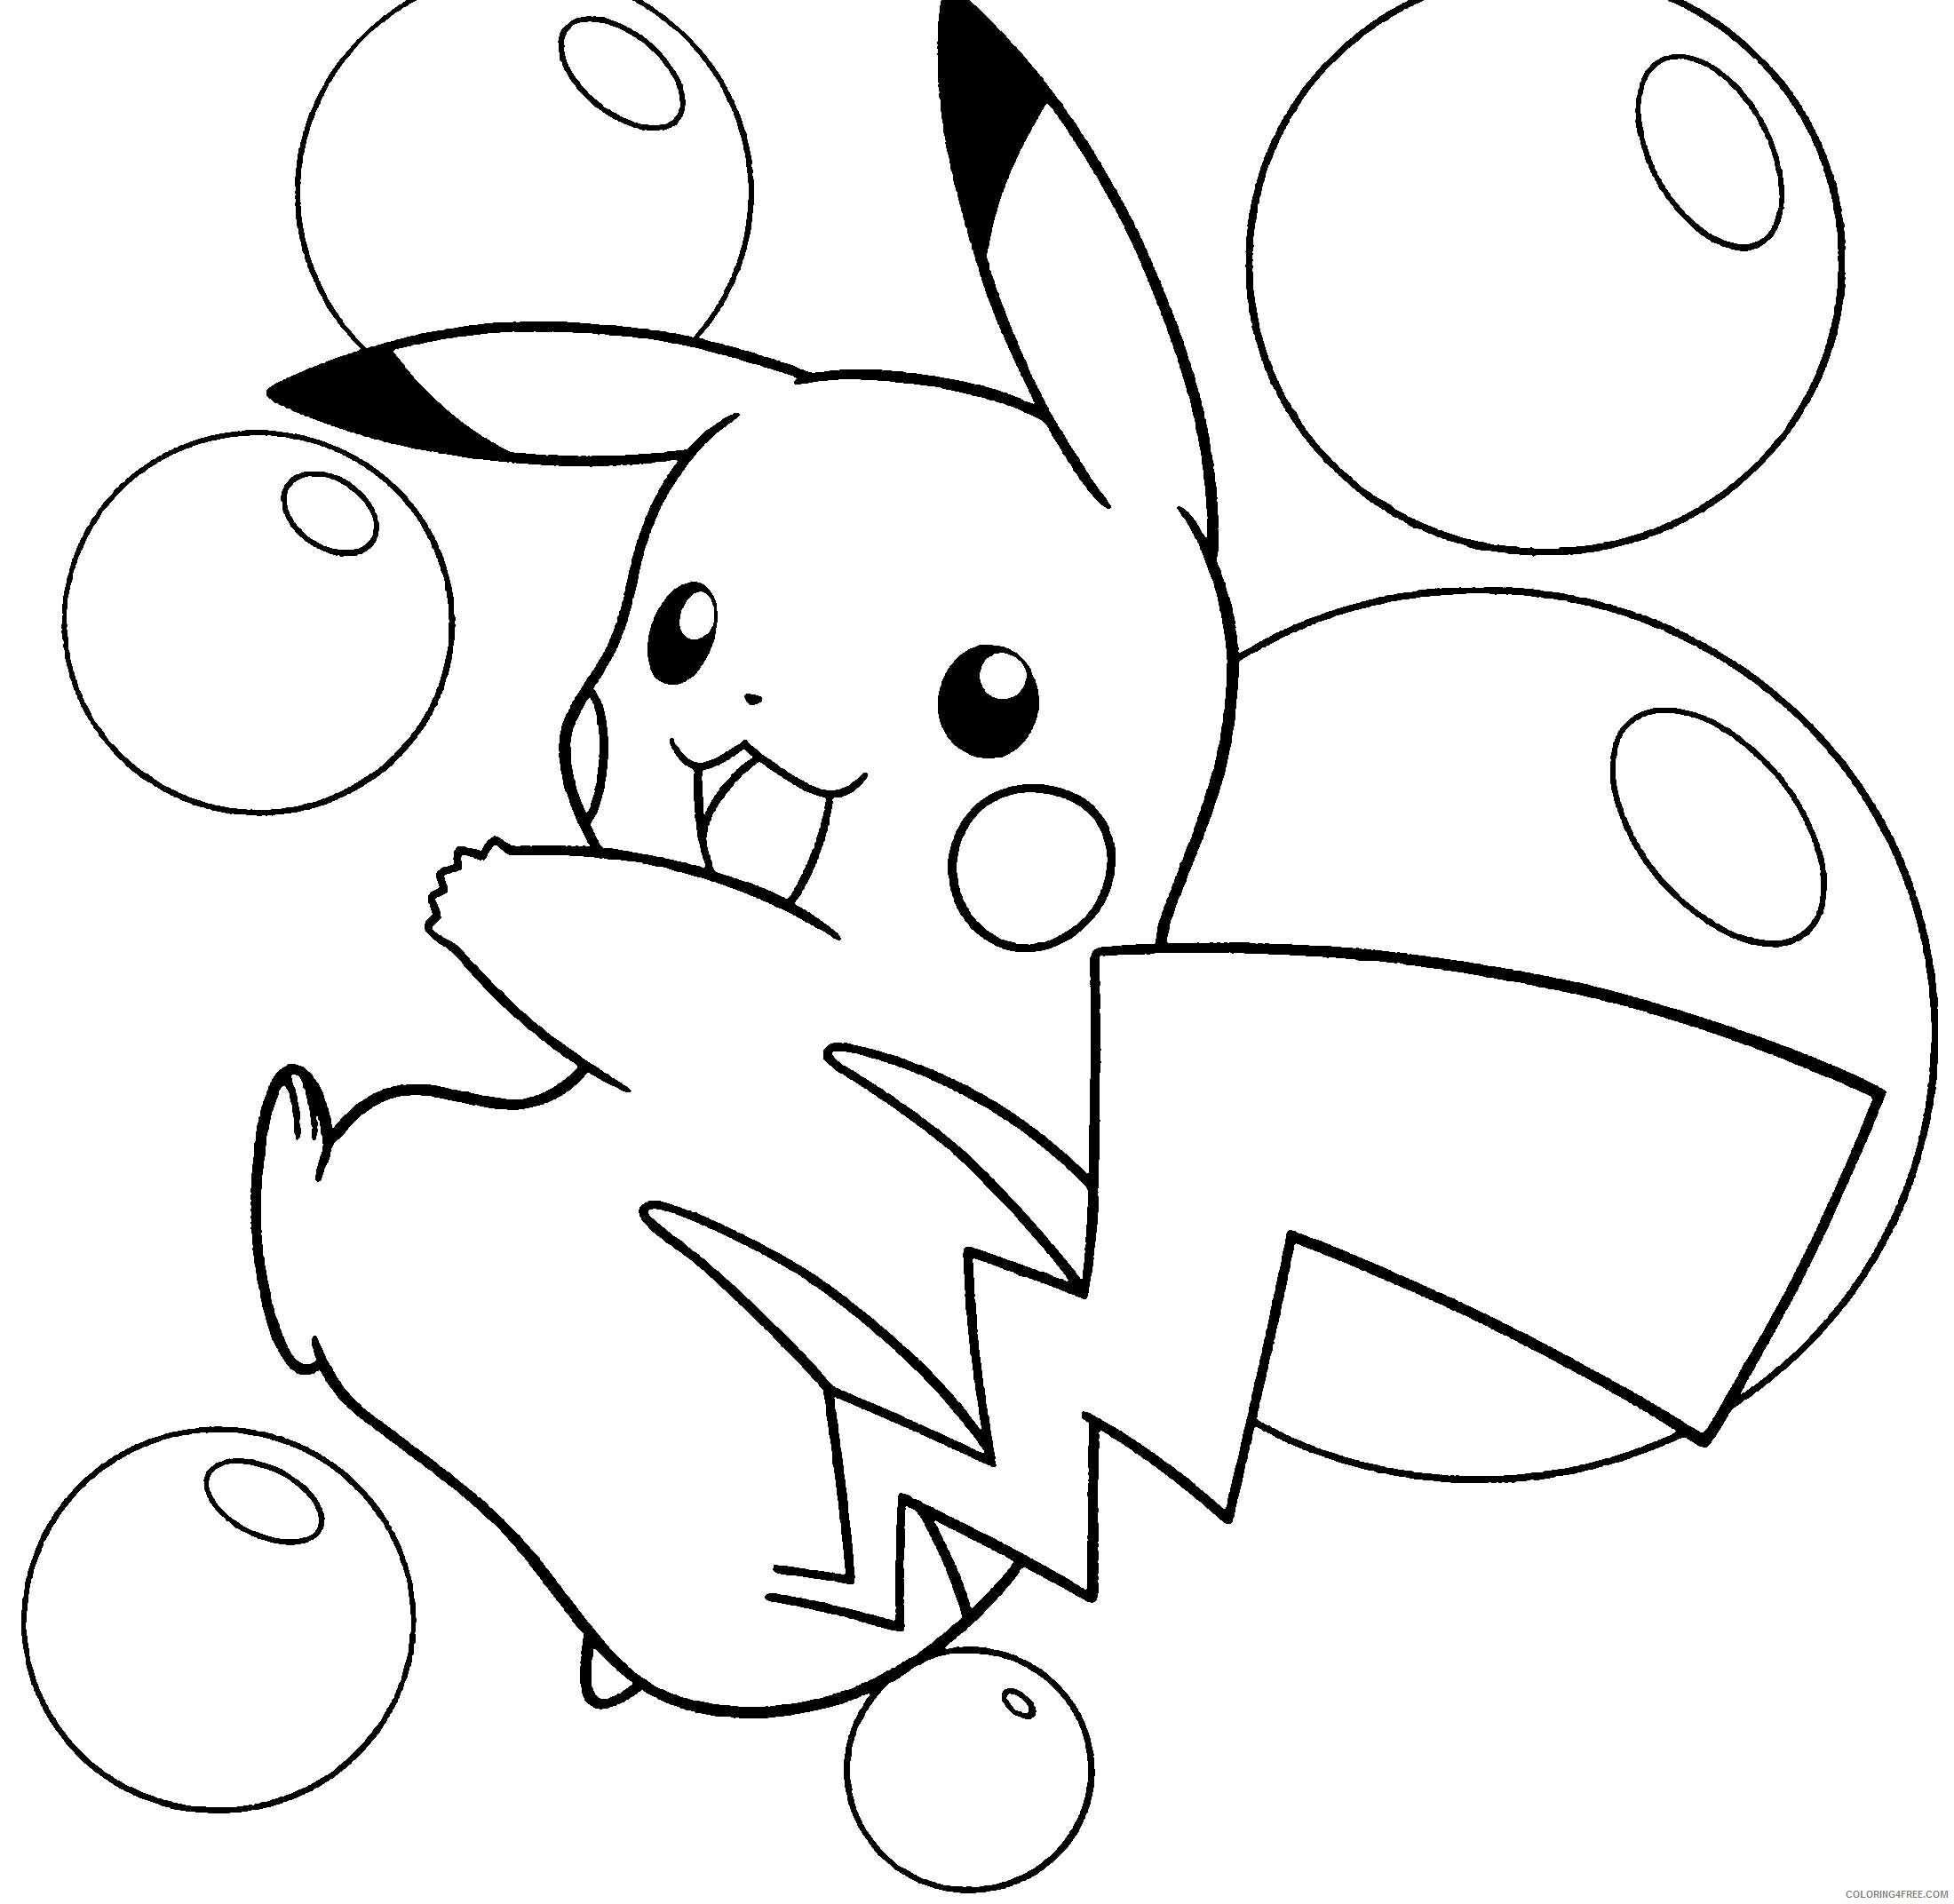 coloring-pages-pikachu-and-friends-of-coloring-pages-pikachu-and-friends Coloring Pages Pikachu and Friends Cartoon 